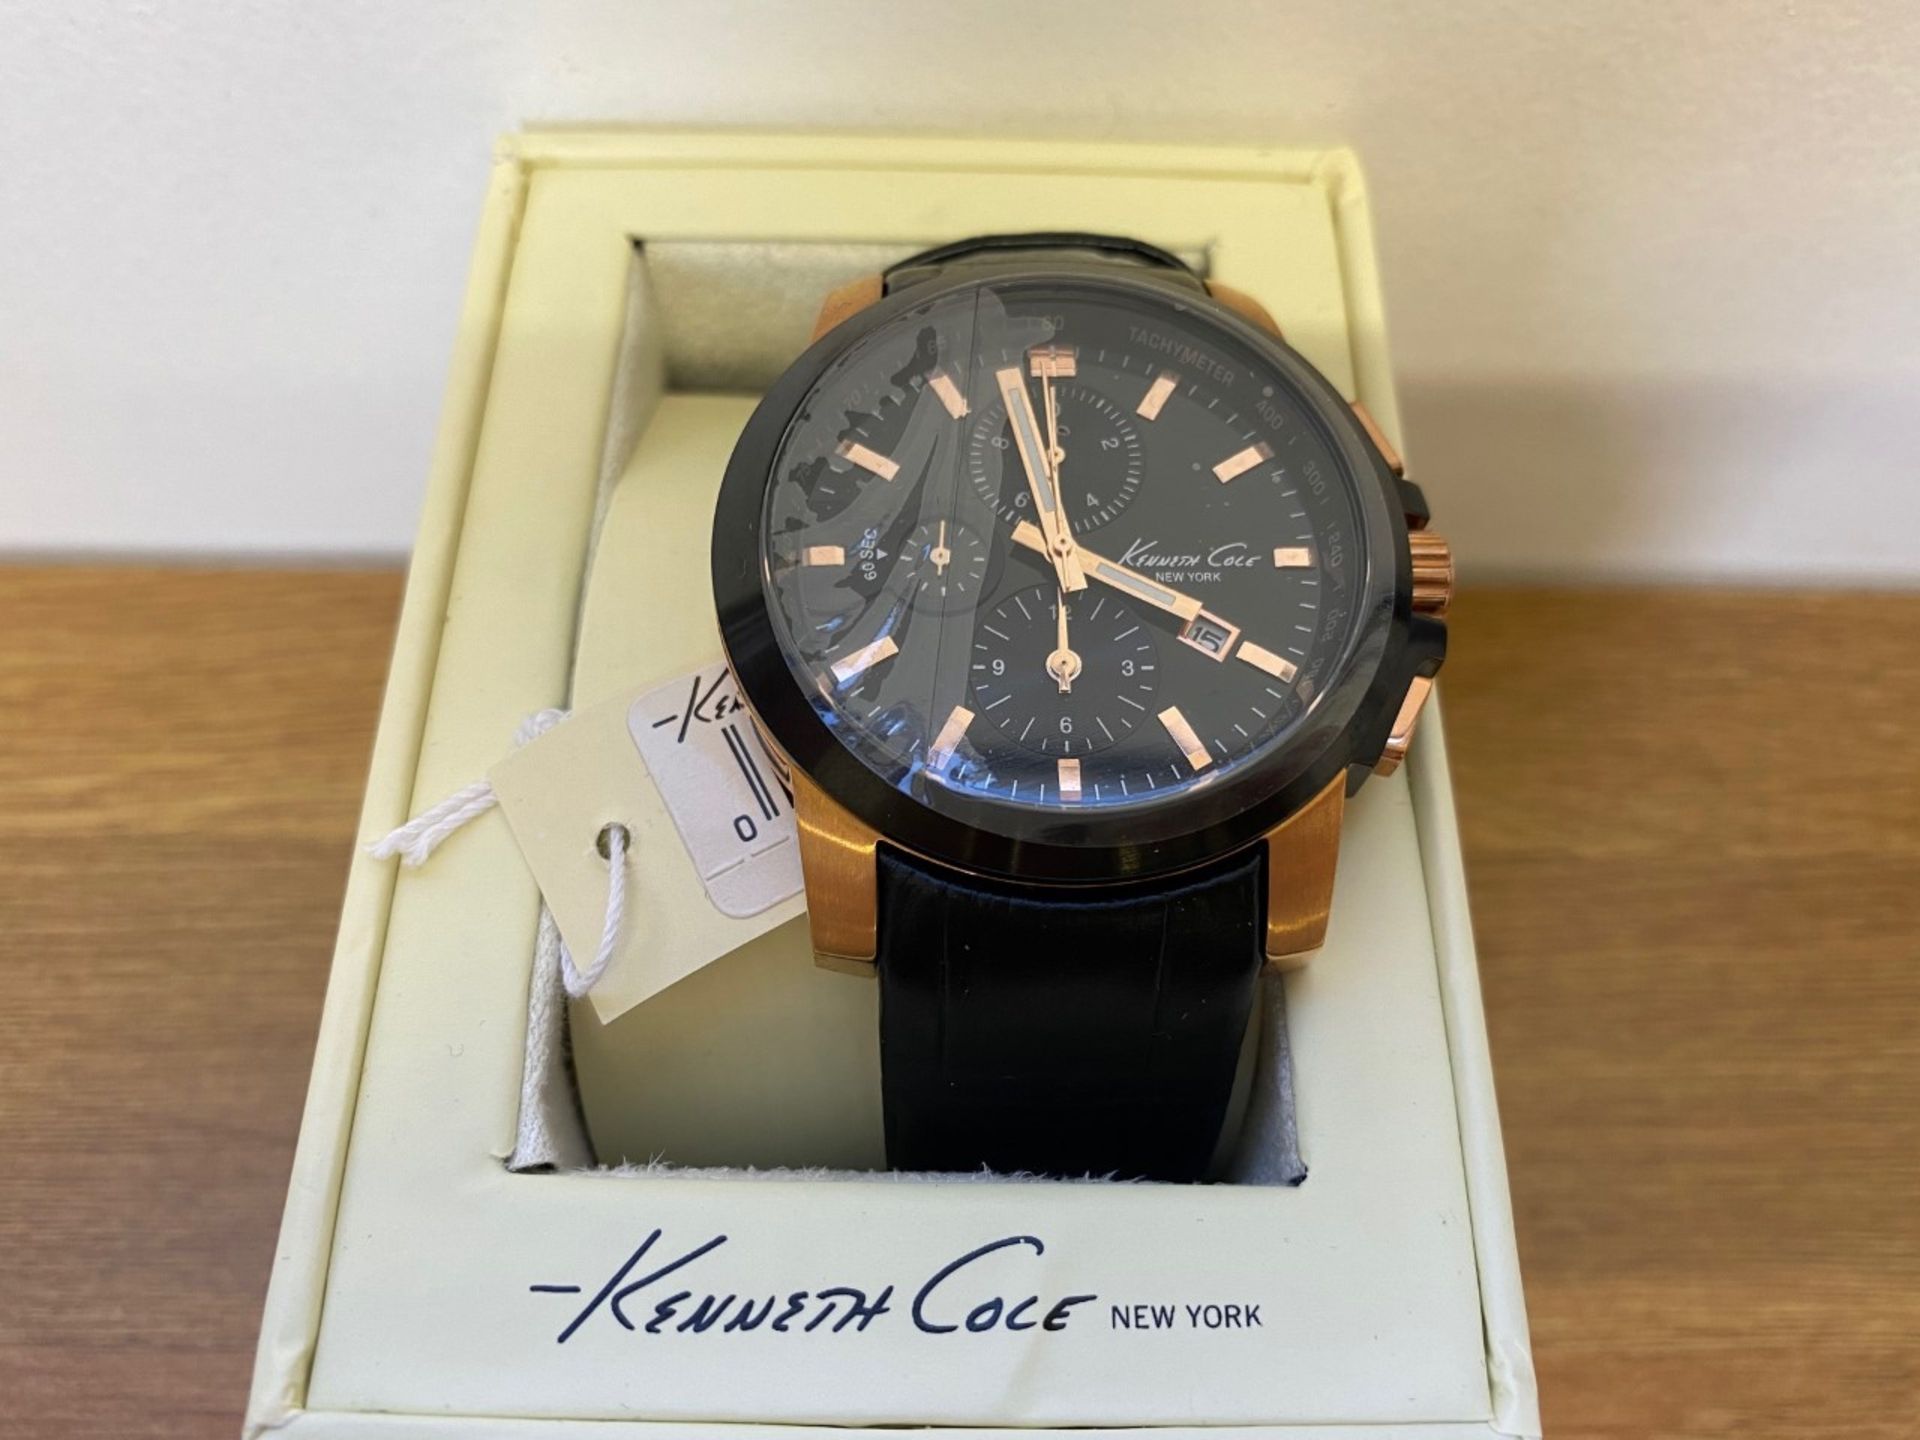 NEW & BOXED Kenneth Cole New York Men's KC1816 Watch. Sporty chronograph features in a package - Image 3 of 3